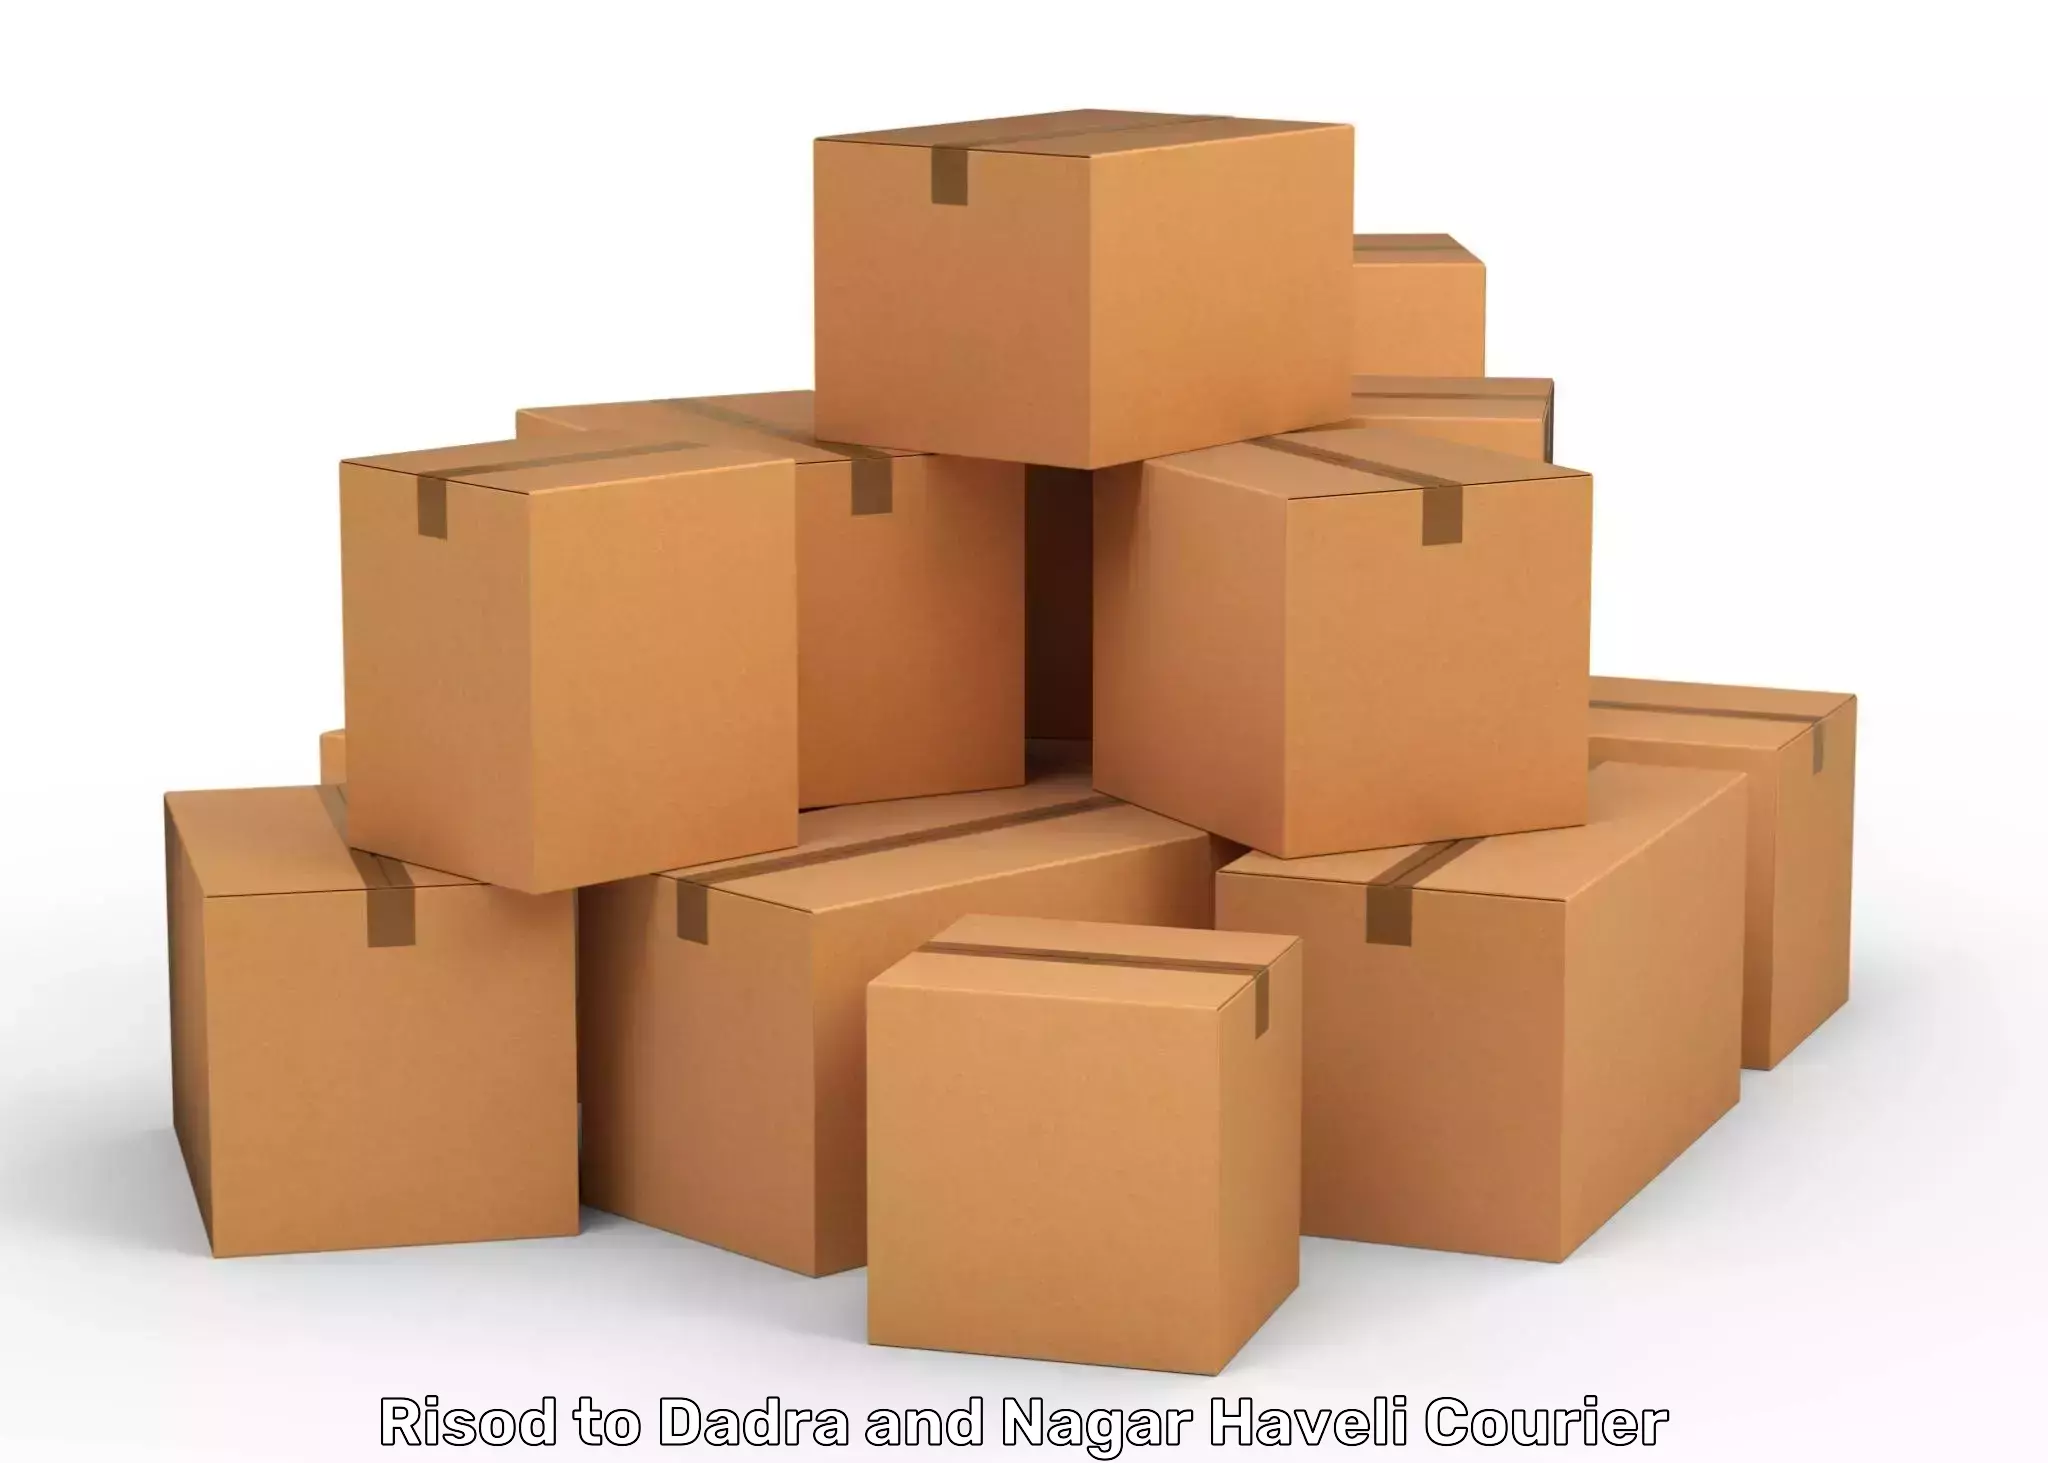 Nationwide parcel services in Risod to Silvassa